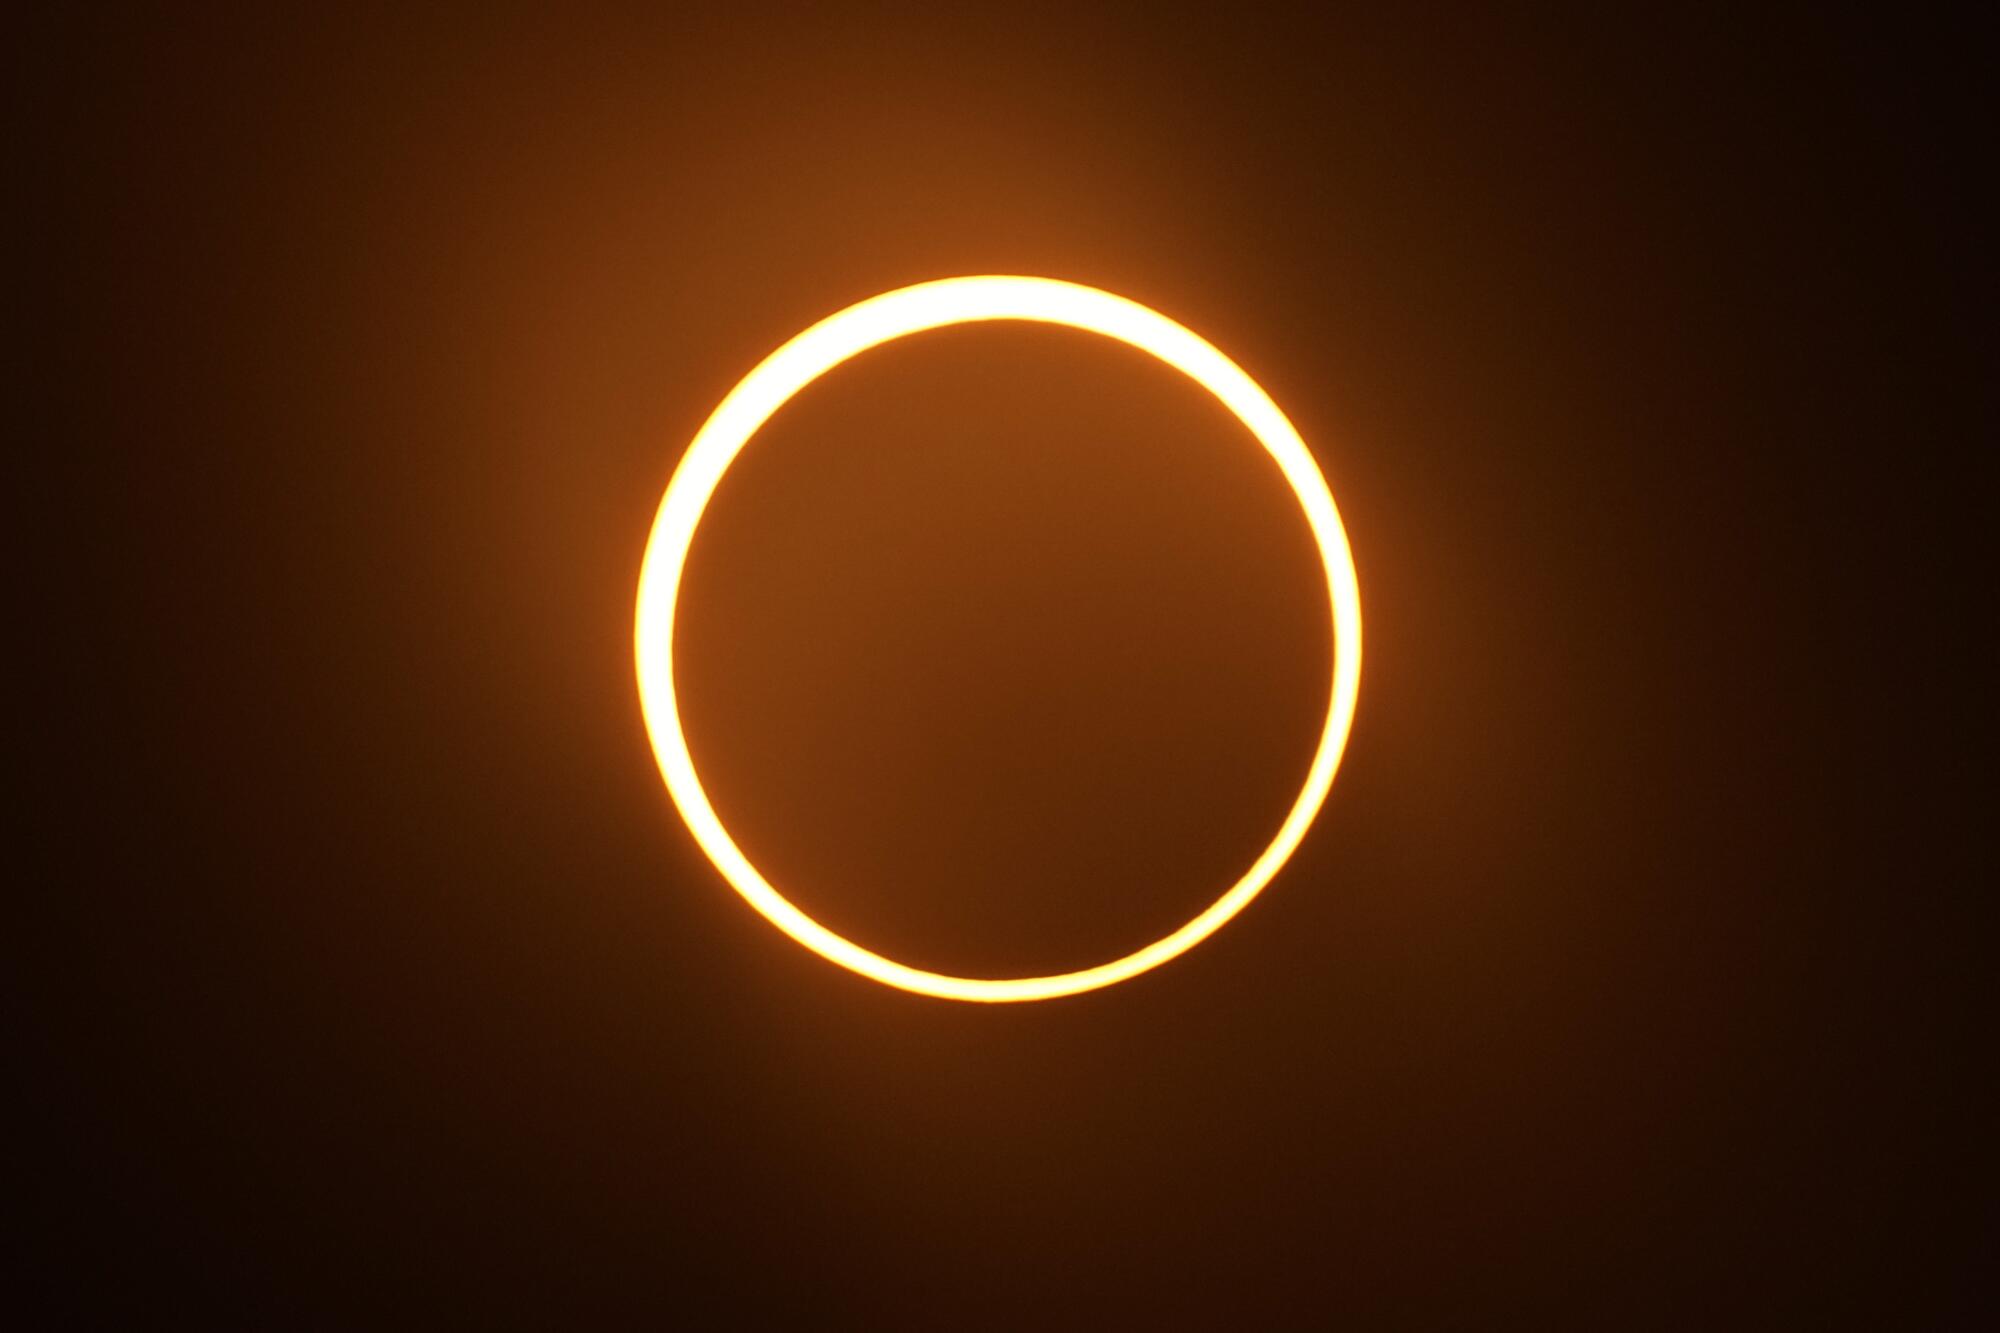 The moon moves in front of the sun during an annular solar eclipse, or ring of fire.